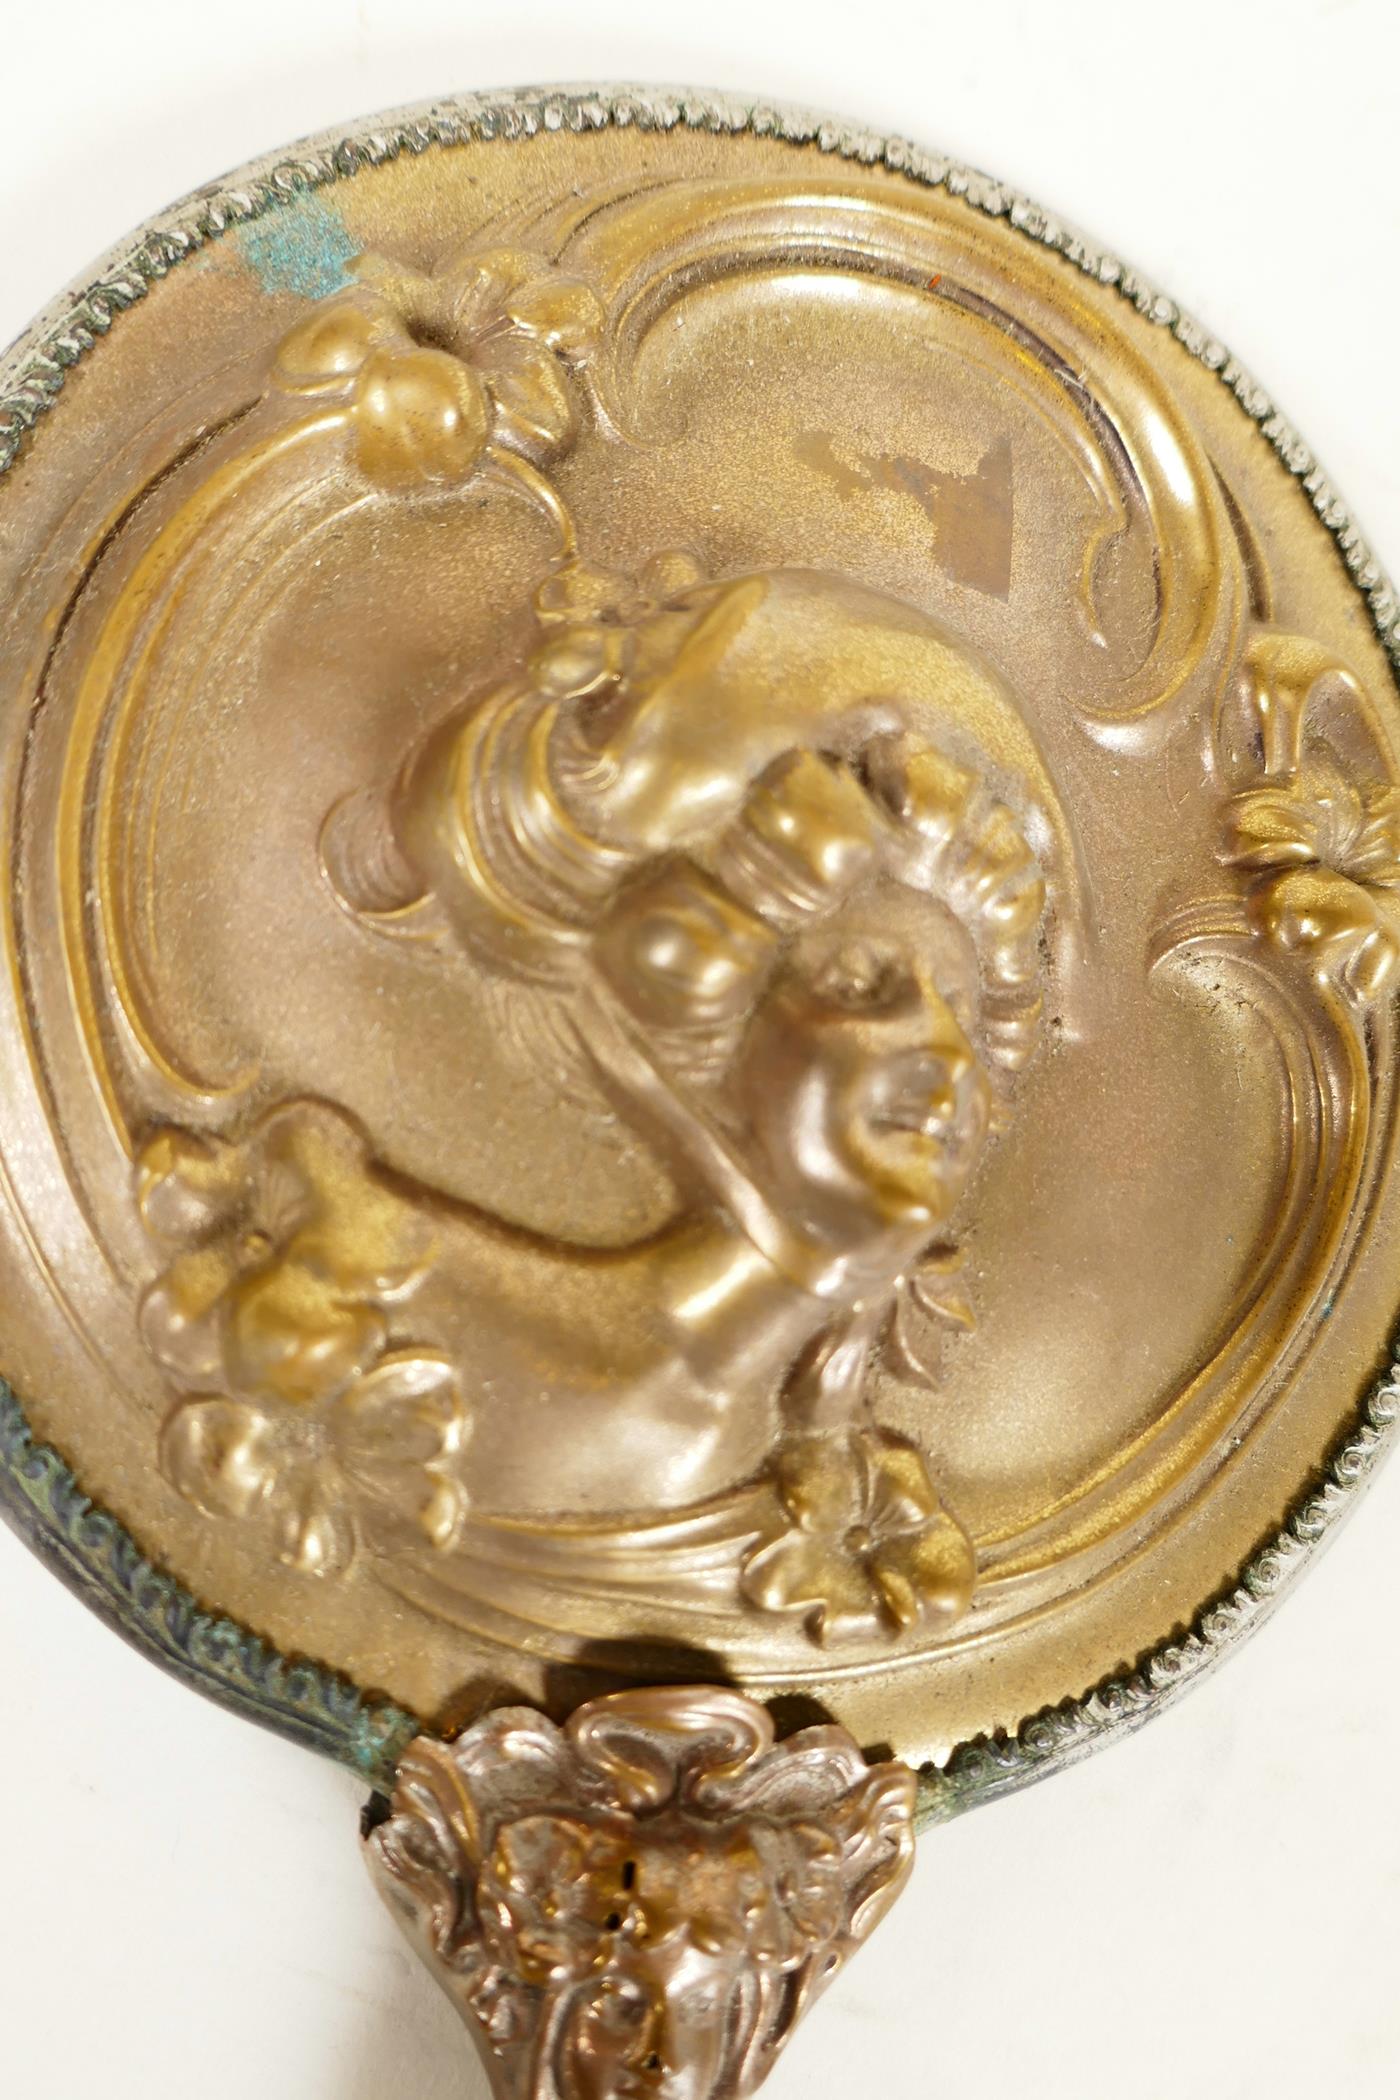 A C19th Art Nouveau bronze hand mirror embossed with scrolls and faces, and bejewelled glass mirror, - Image 3 of 4